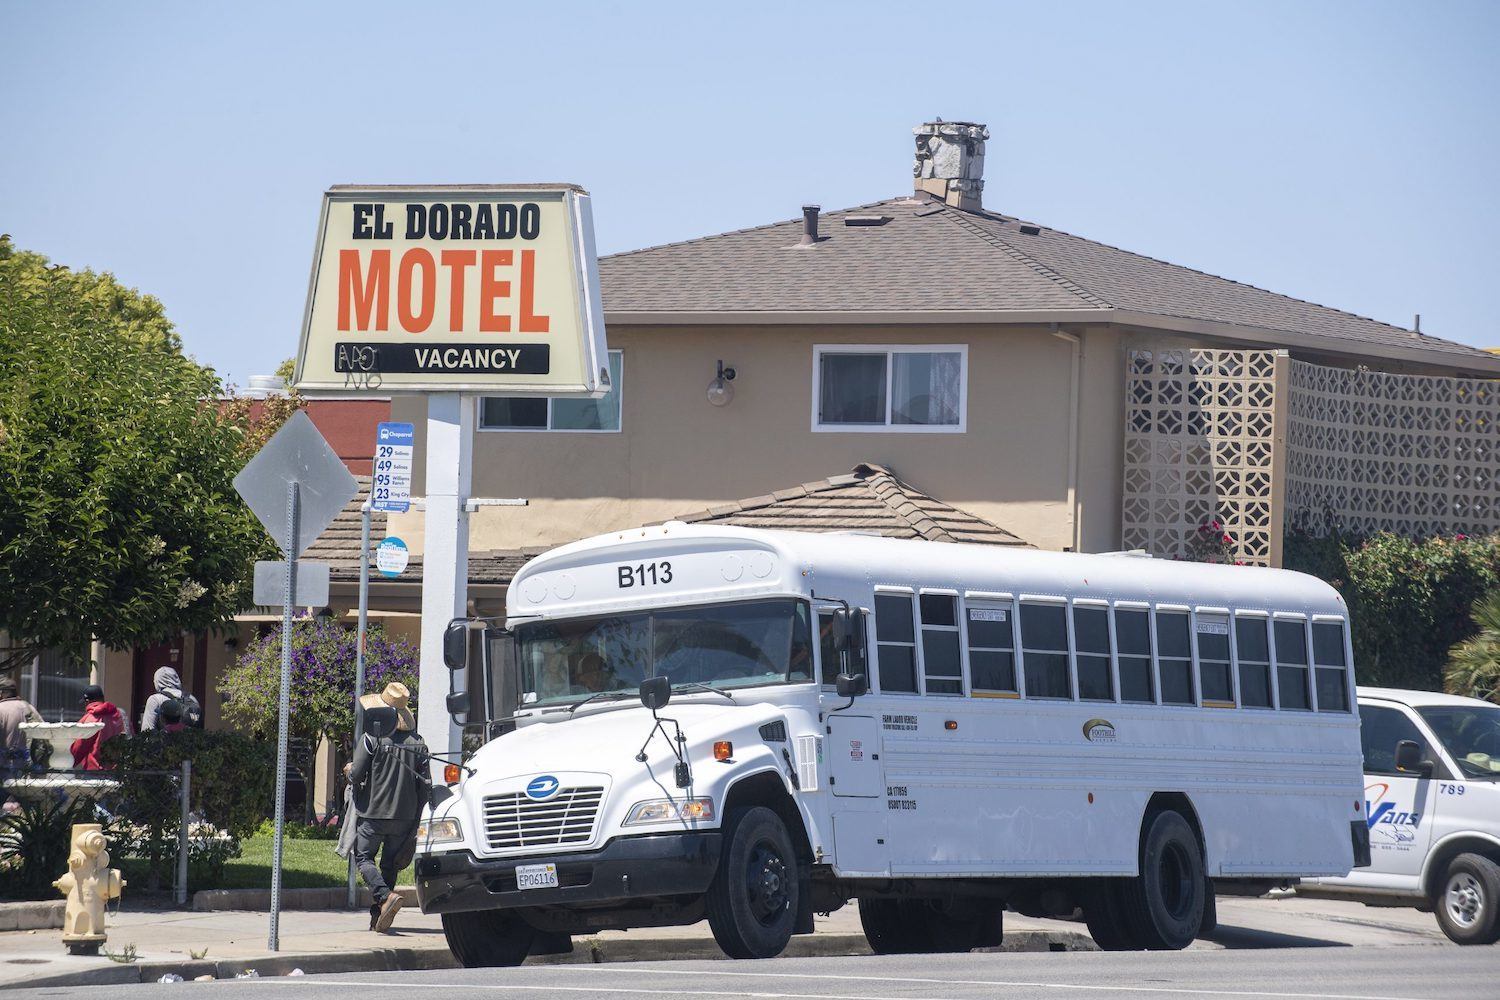 A white bus stops in front of El Dorado Motel with workers exiting. August 2020